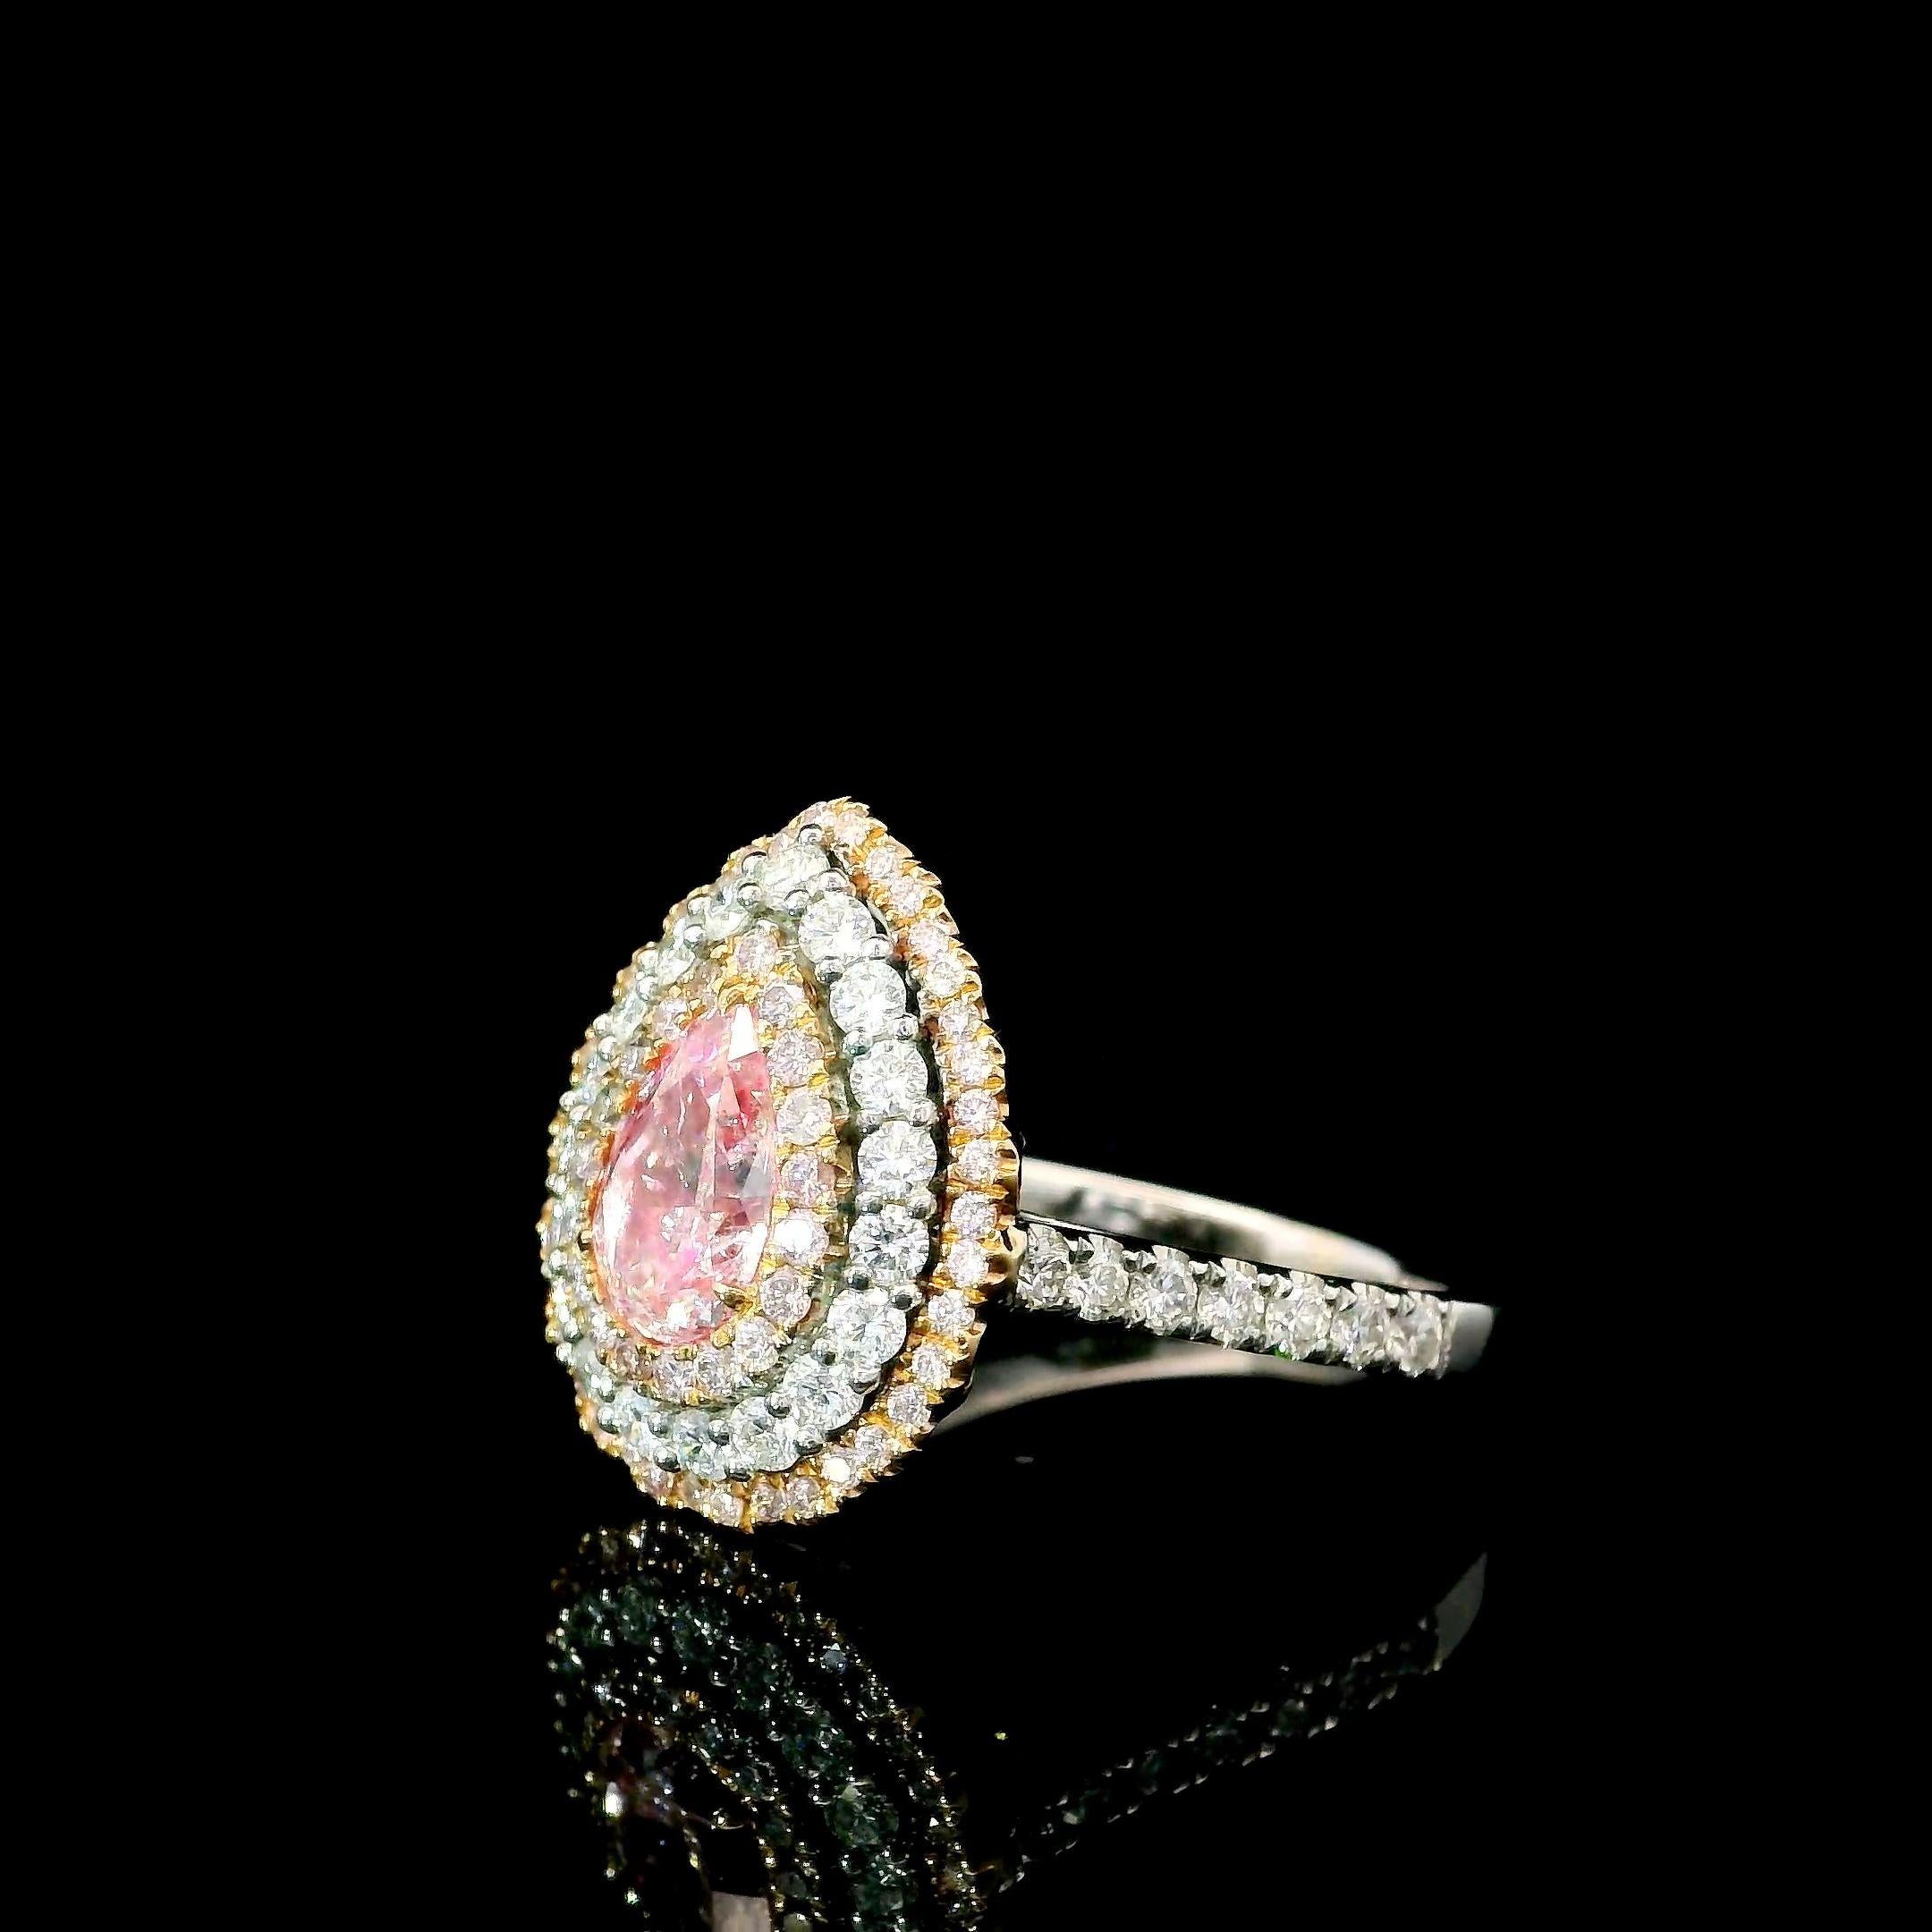 1.00 Carat Light Pinkish Brown Diamond Ring I1 Clarity GIA Certified For Sale 2